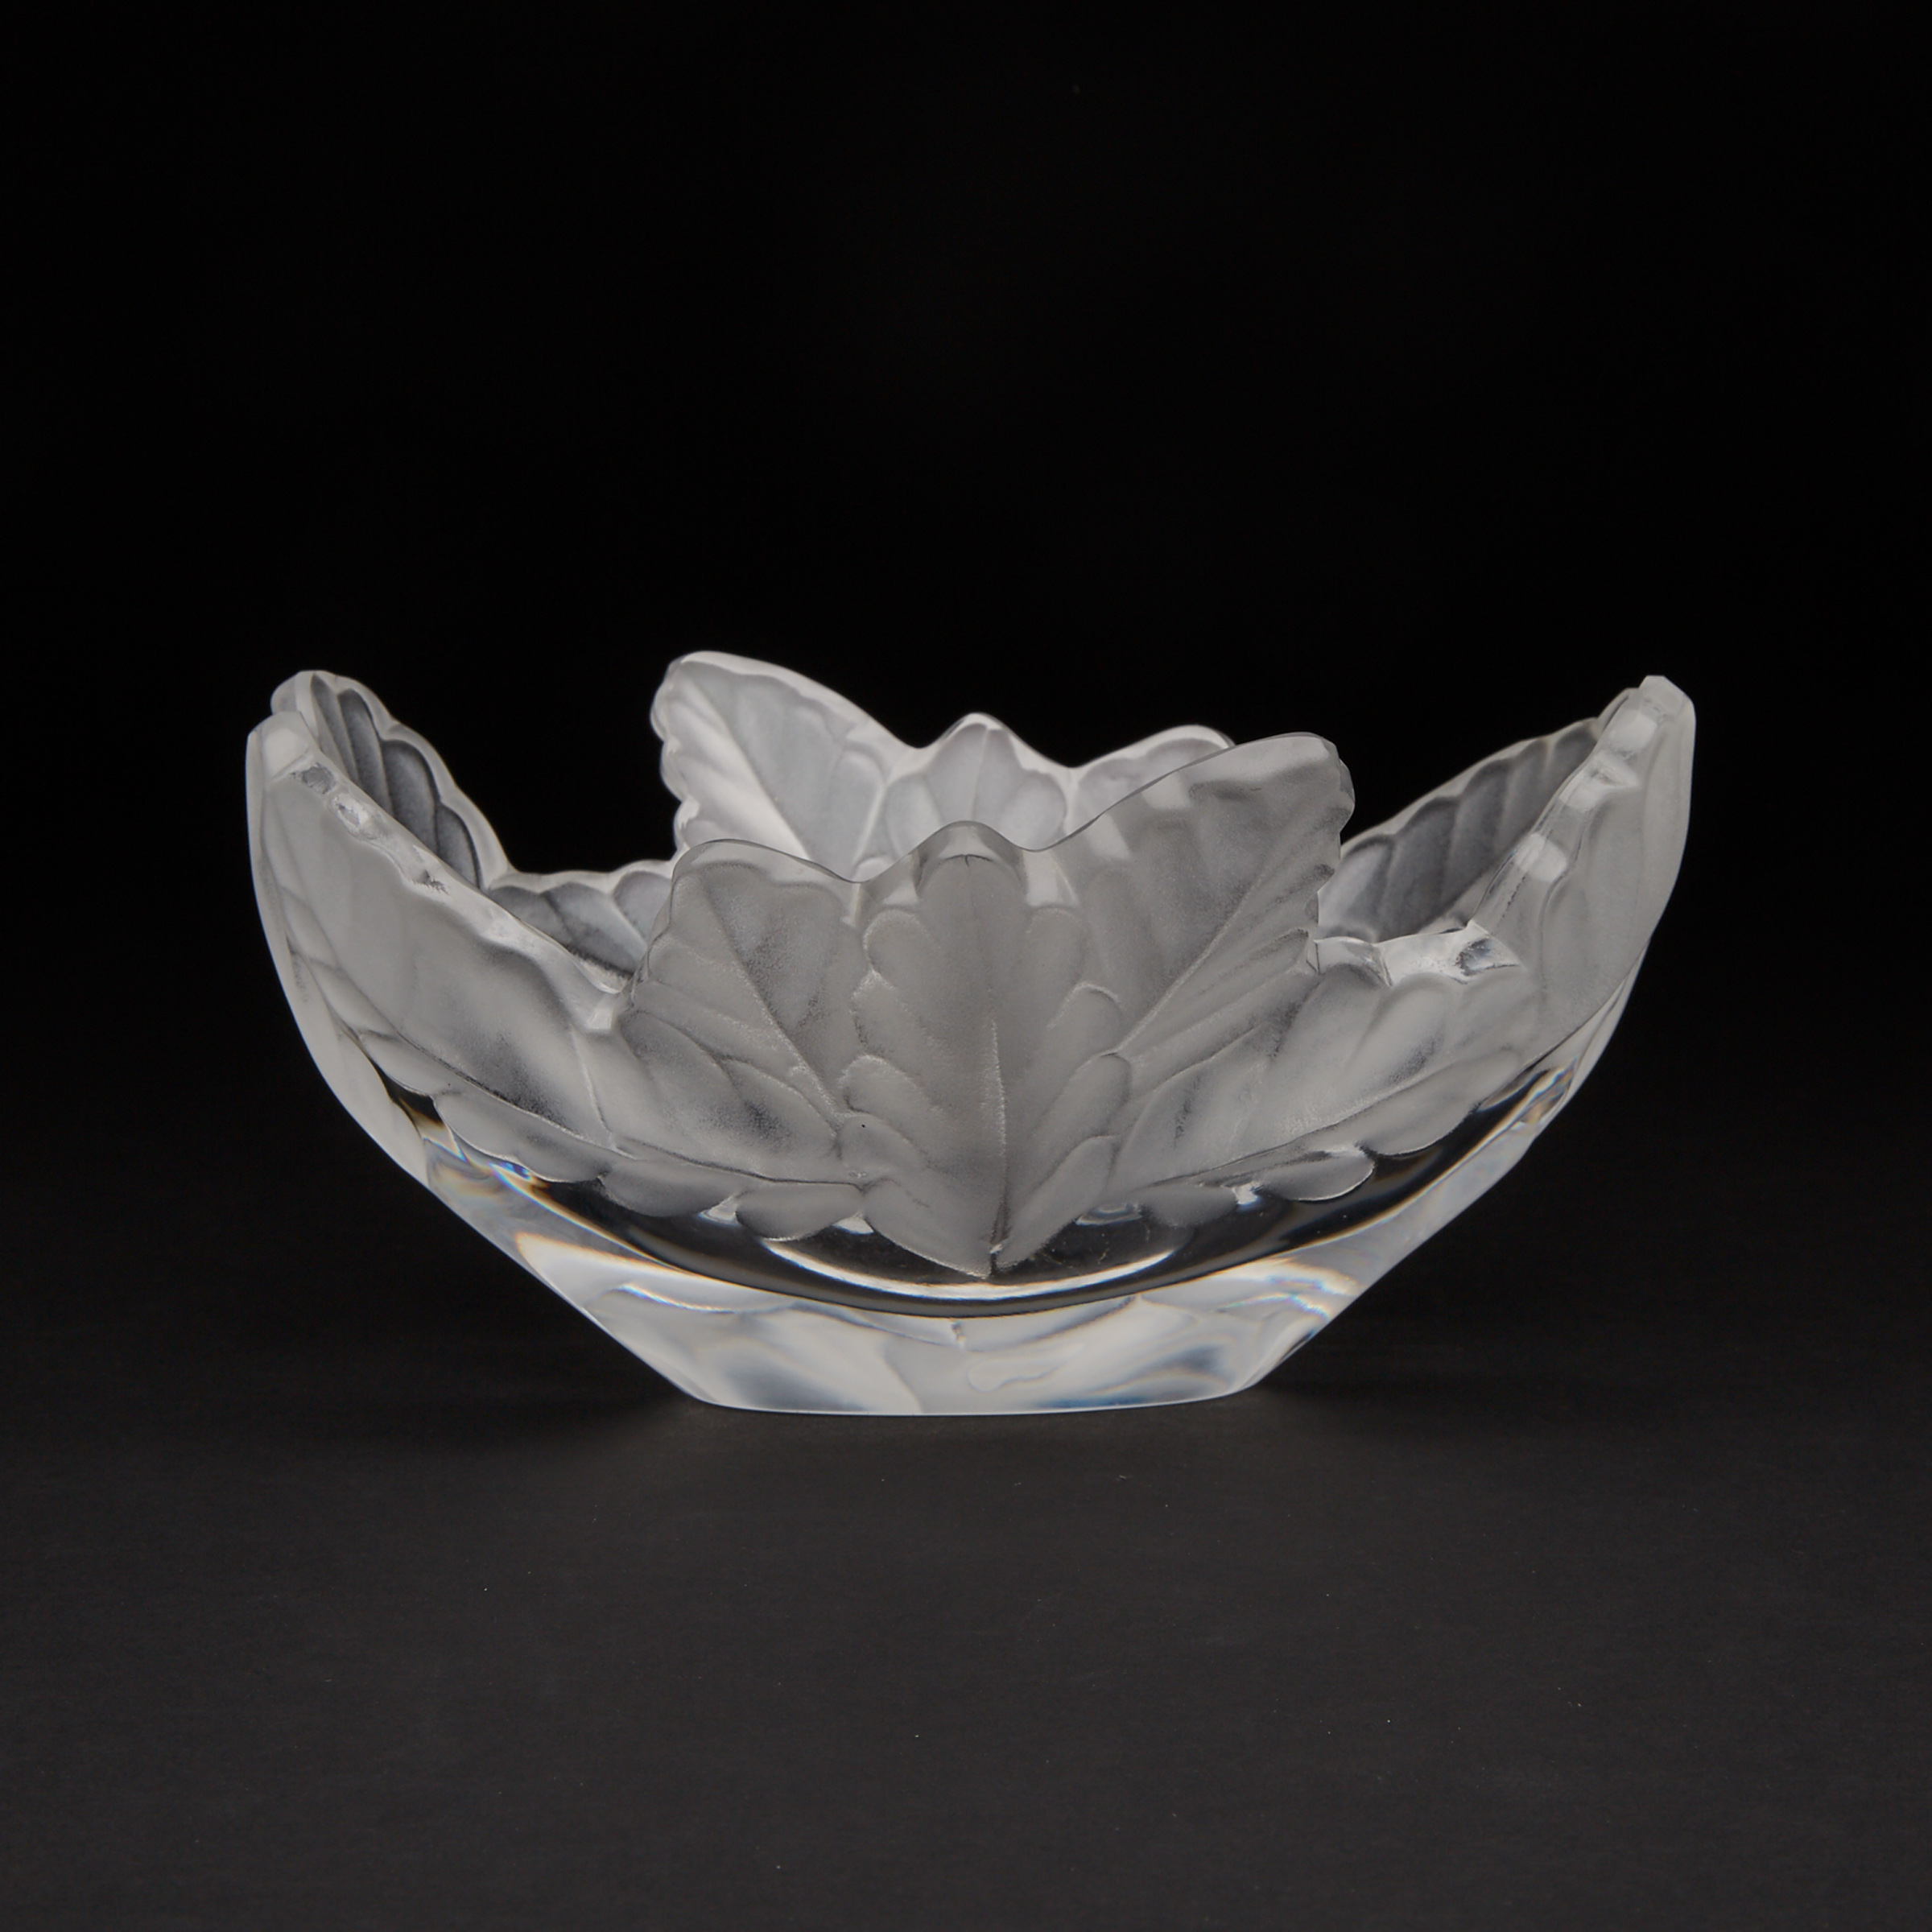 ‘Compiegne’, Lalique Moulded and Frosted Glass Bowl, post-1945